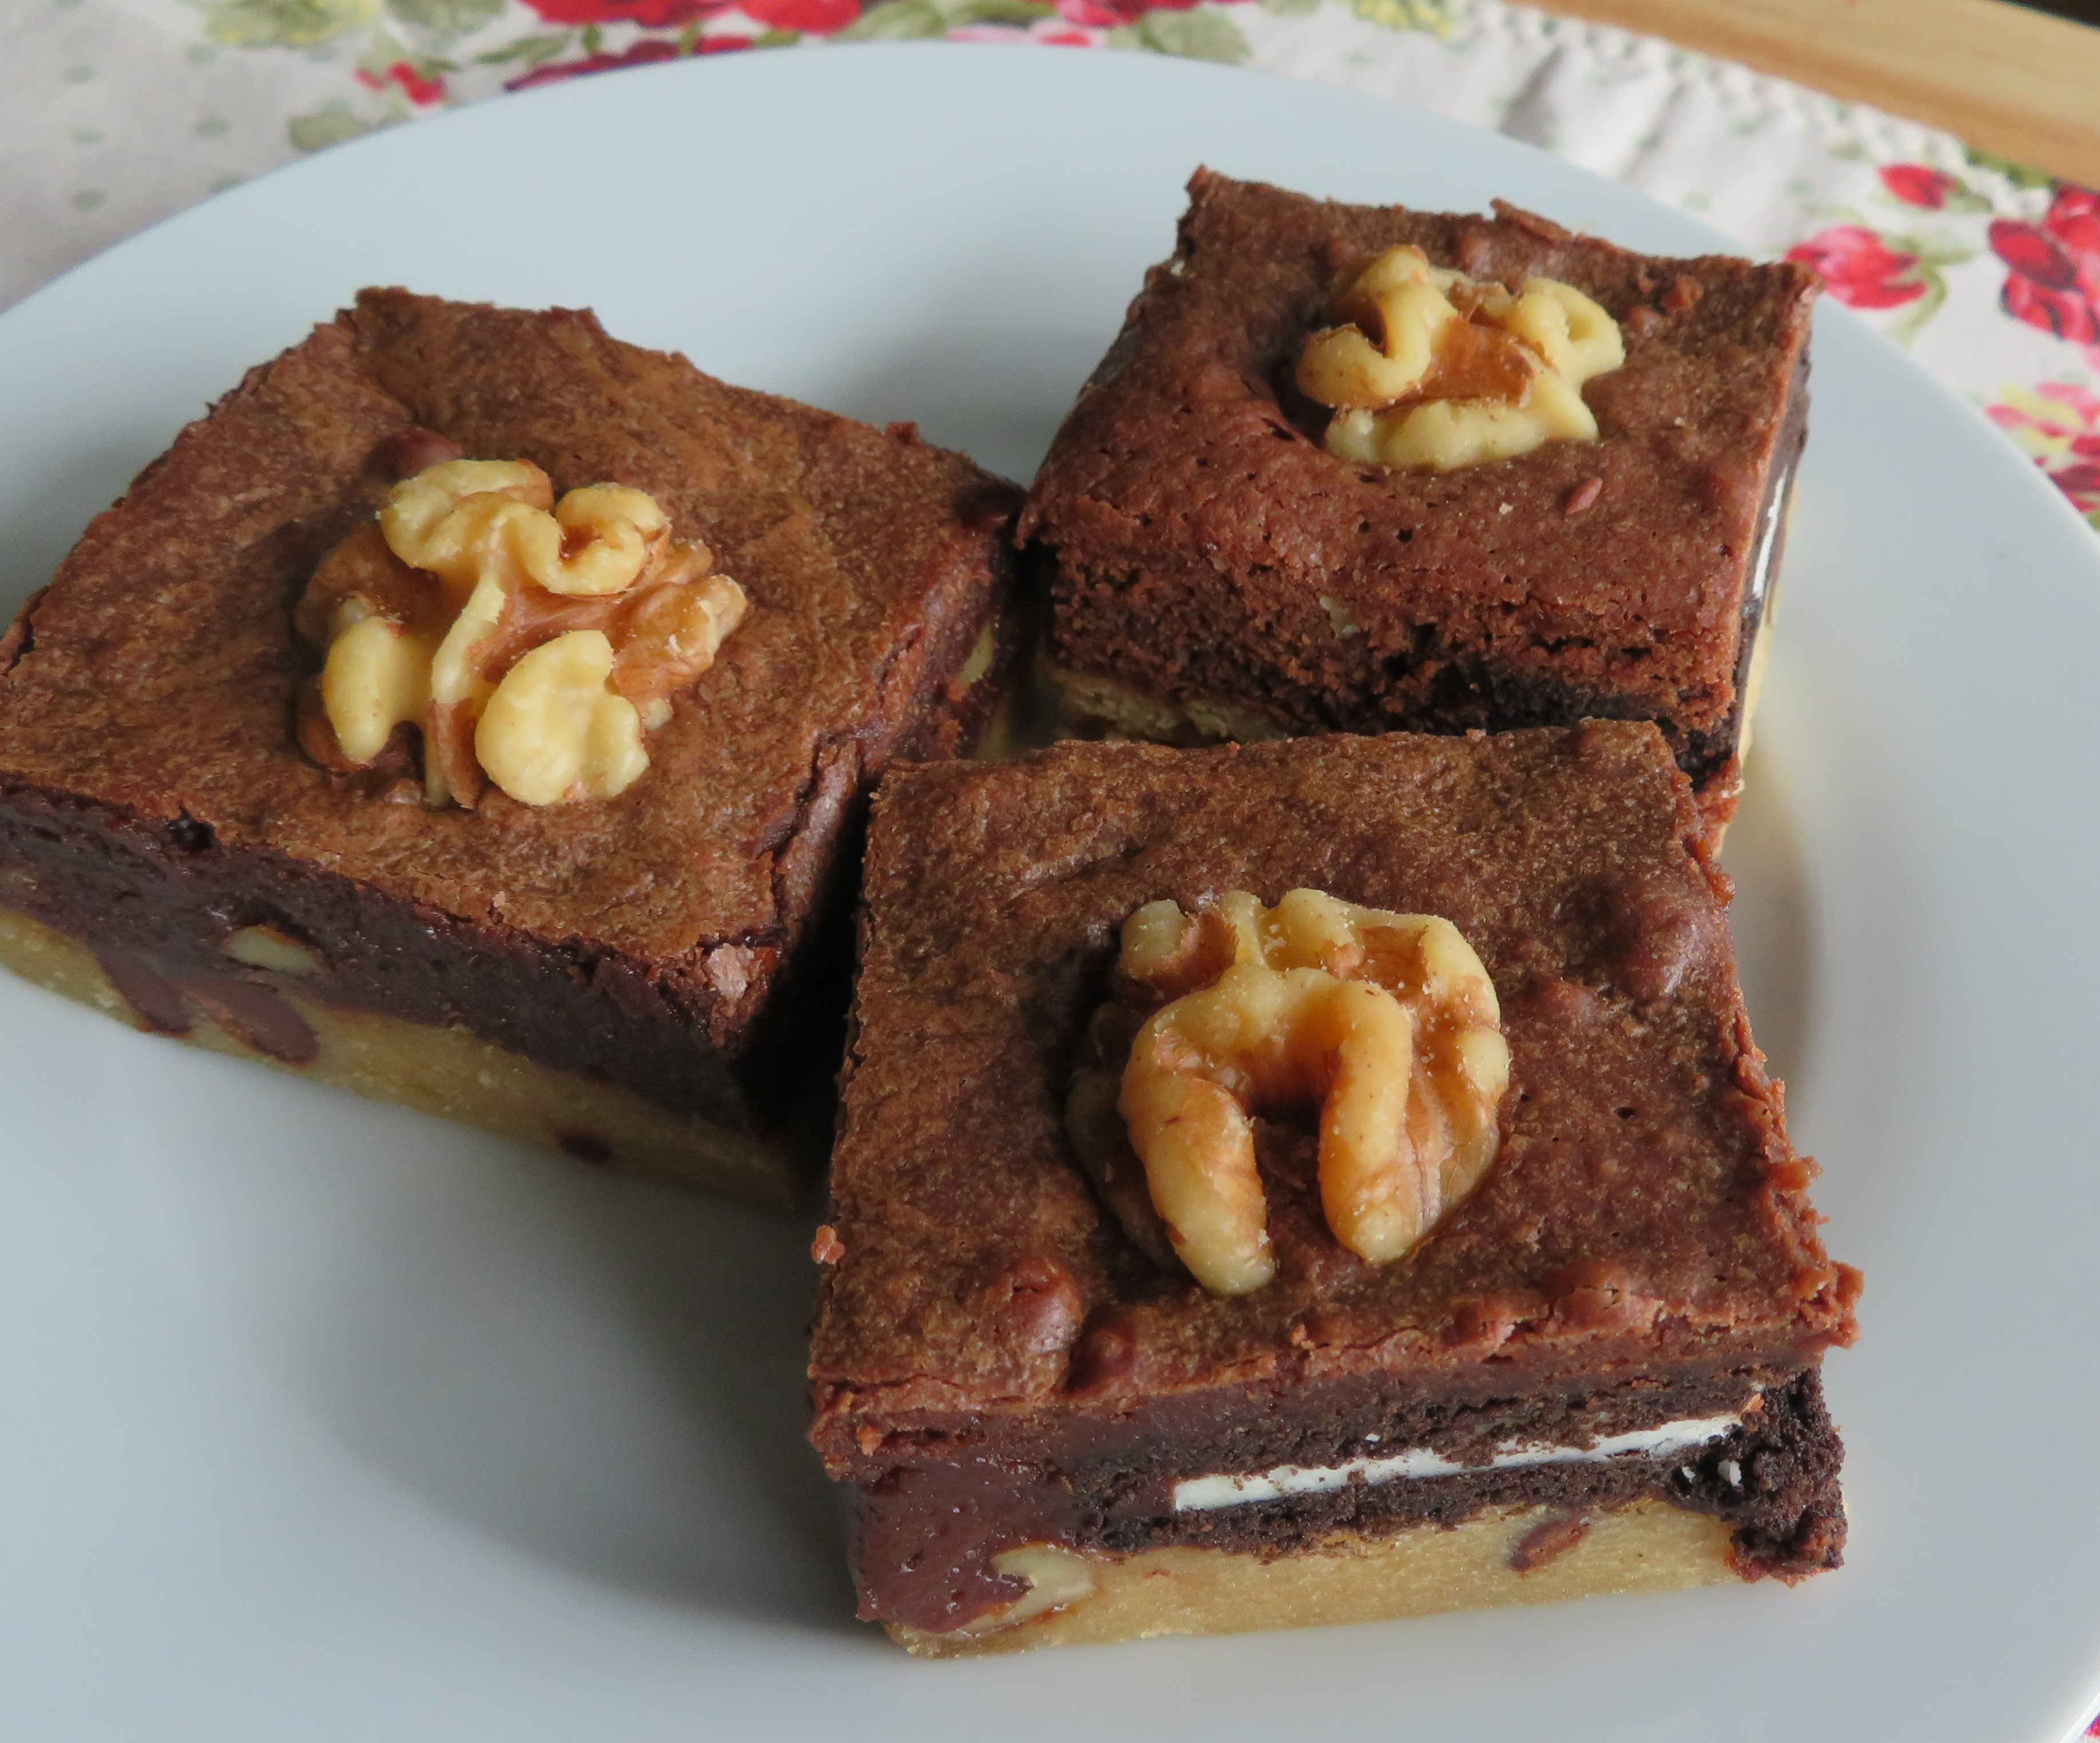 Slutty Brownies - Homemade, Fudgy, Delicious - Just so Tasty